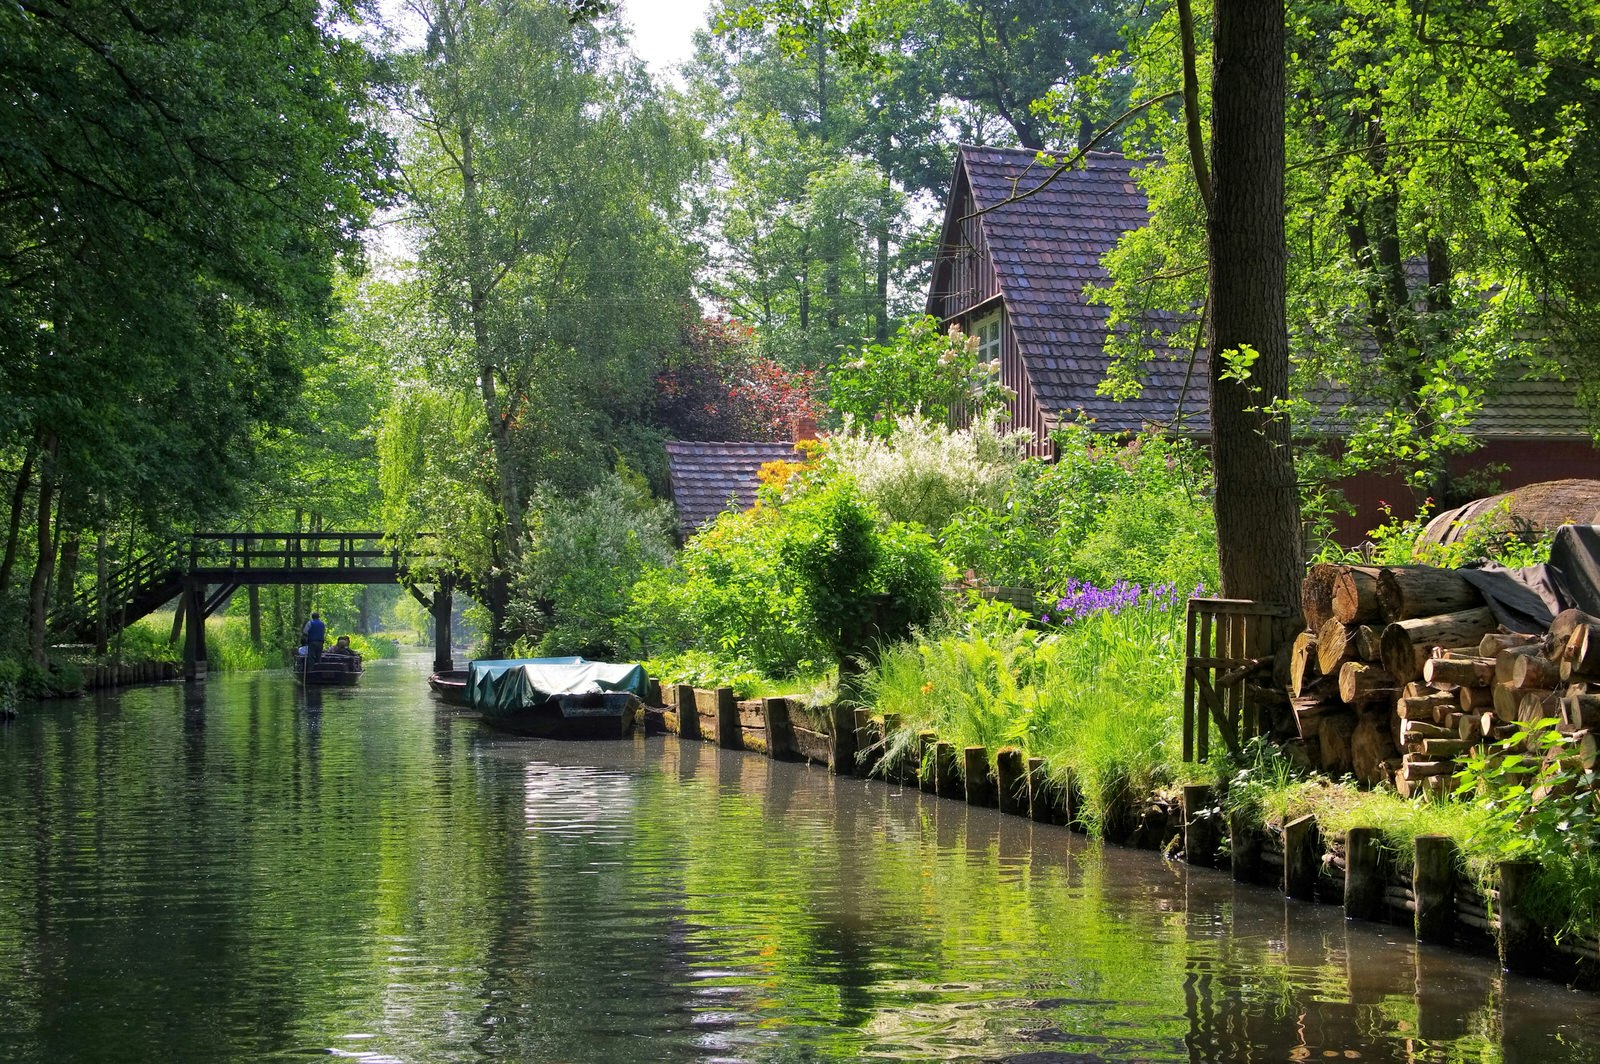 Berlin day trips - Spree Forest house, in Spreewald, viewed from a canal. The house's peaked roof prtrudes from colourful flowering trees and there is a wooden bridge over the canal in the distance